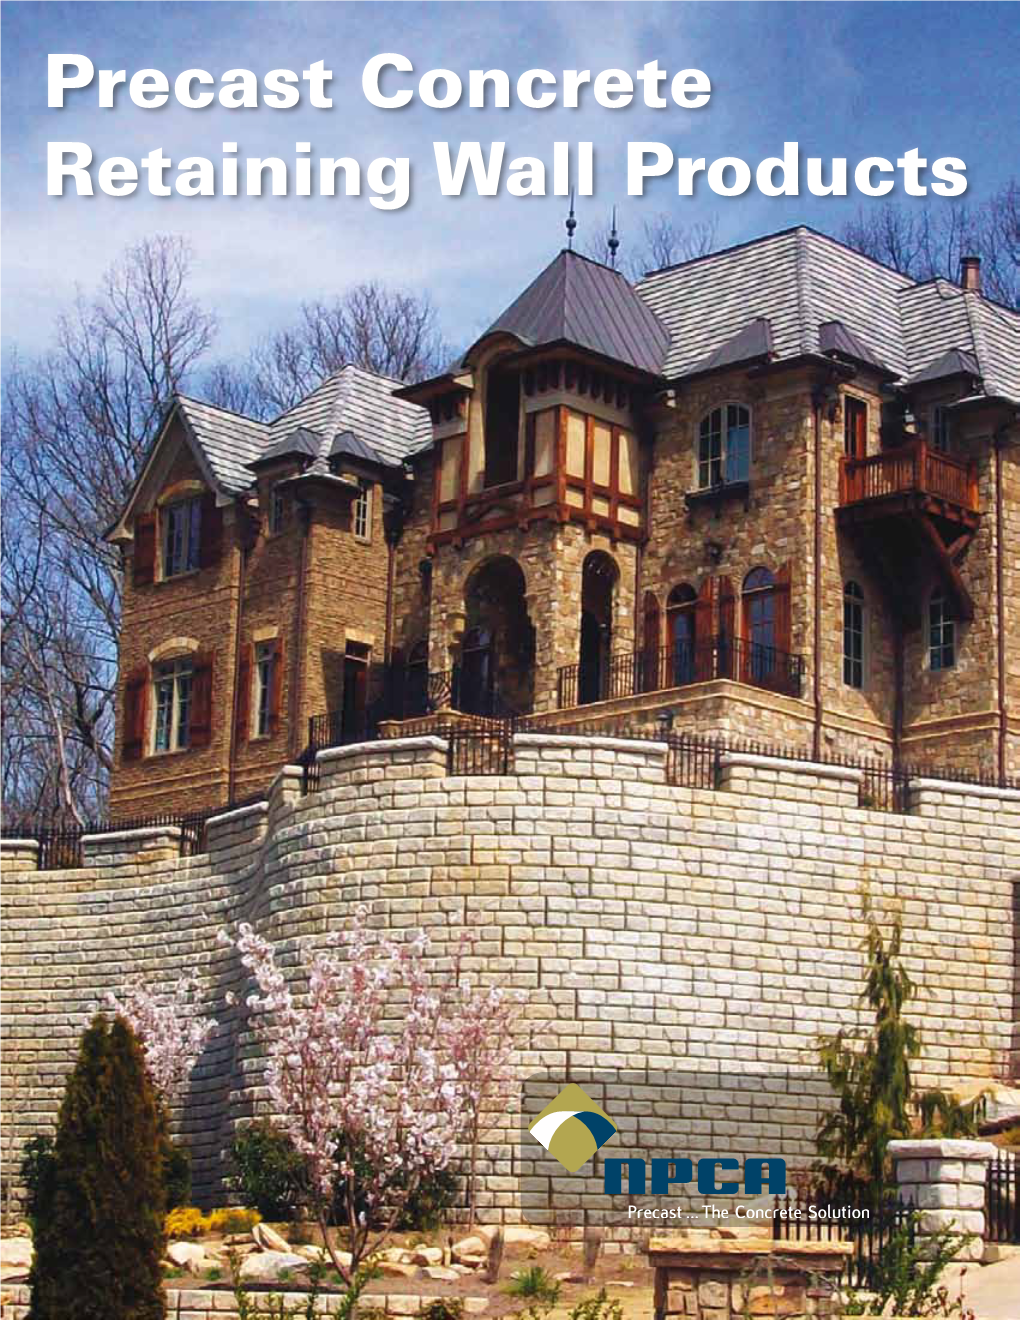 Precast Concrete Retaining Wall Products